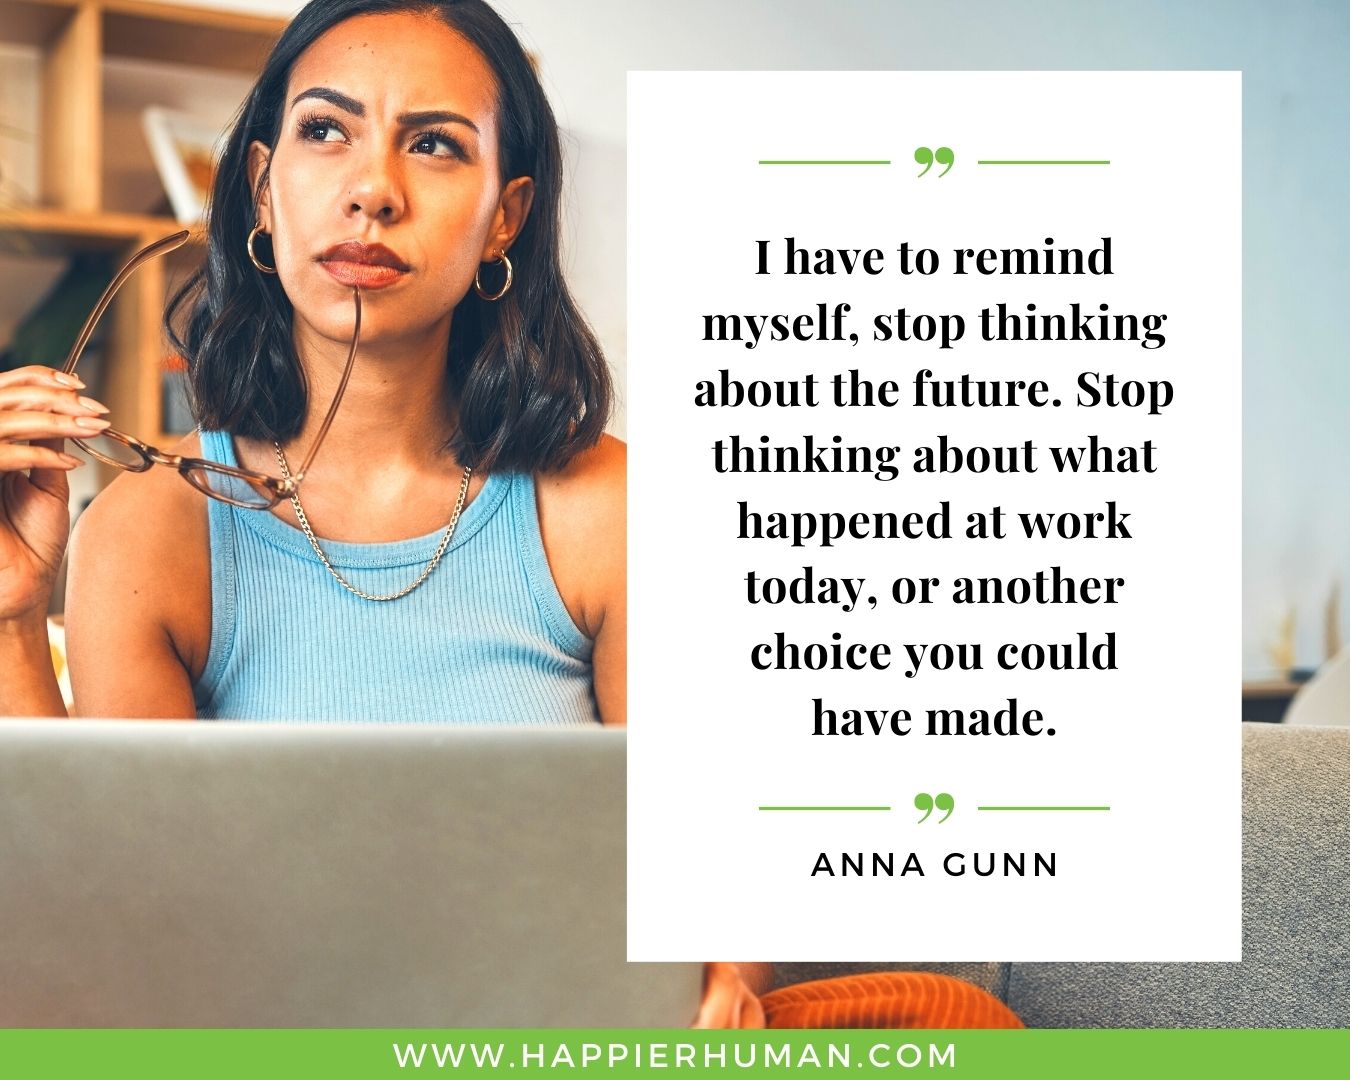 Overthinking Quotes - "I have to remind myself, stop thinking about the future. Stop thinking about what happened at work today, or another choice you could have made." - Anna Gunn